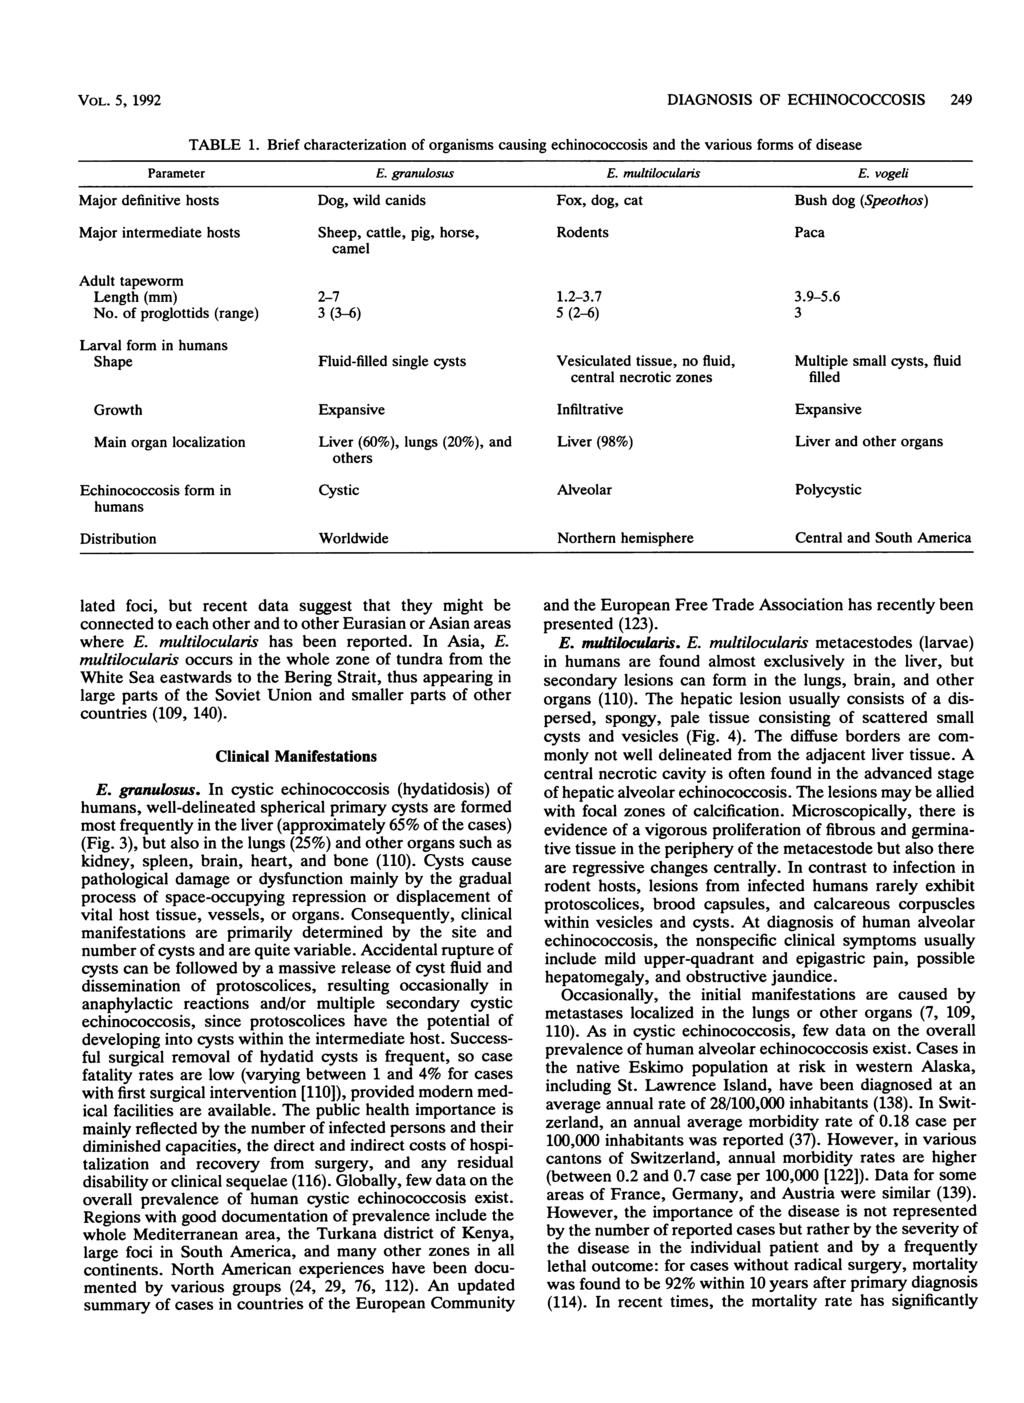 VOL. 5, 1992 DIAGNOSIS OF ECHINOCOCCOSIS 249 TABLE 1. Brief characterization of organisms causing echinococcosis and the various forms of disease Parameter E. granulosus E. multilocularis E.